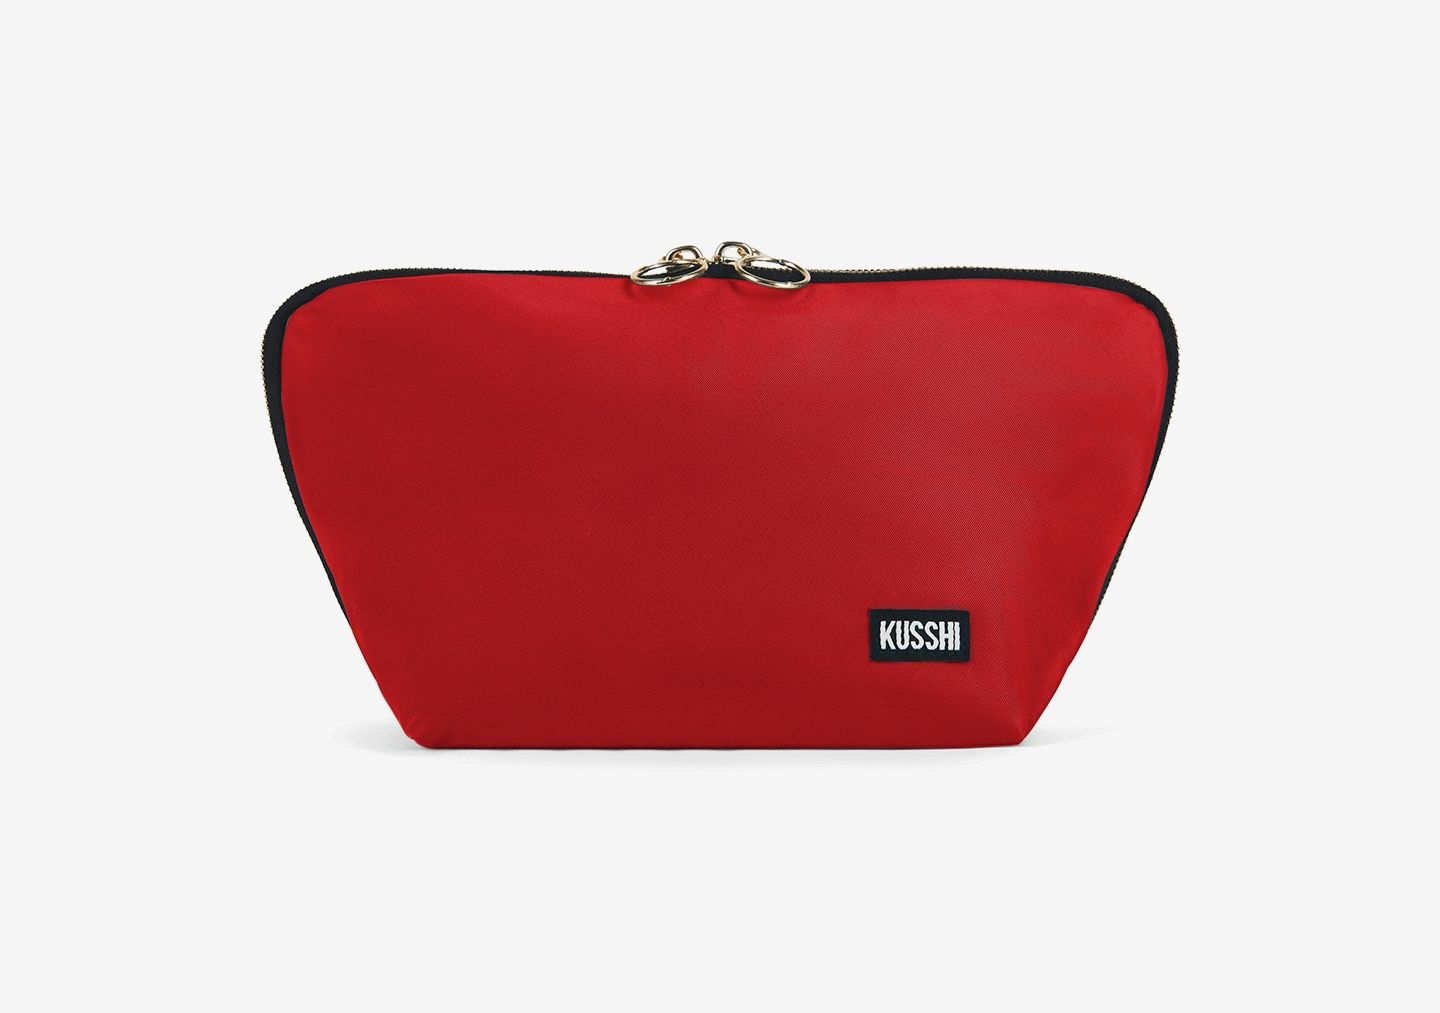 16 Designer Makeup Bags You Can Buy In 2022 - PureWow